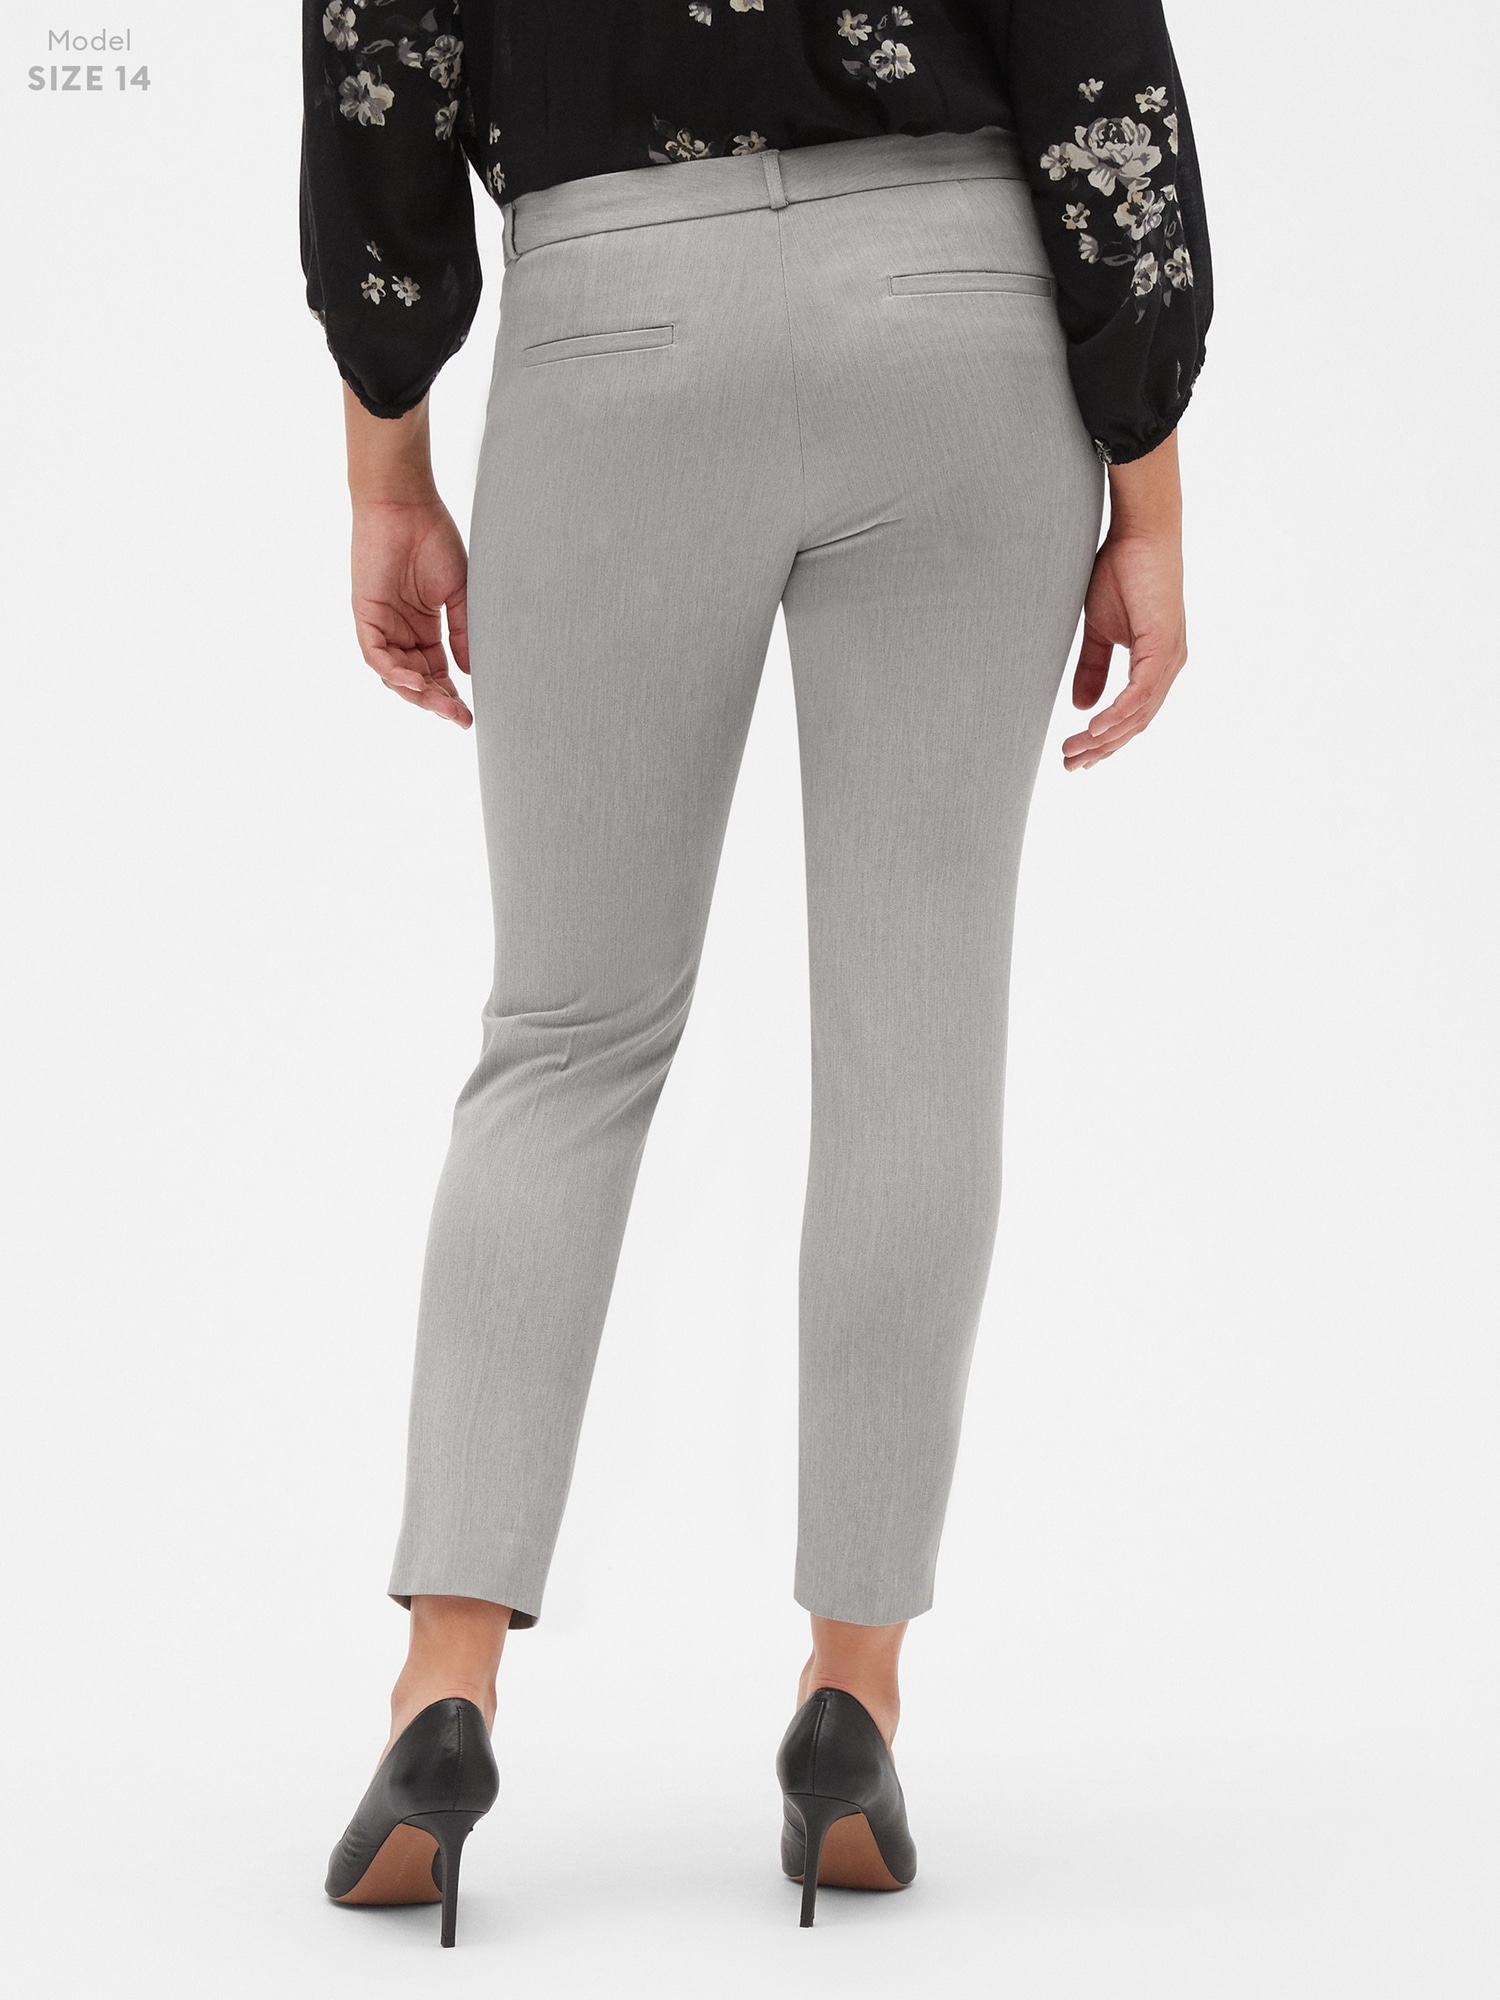 Review: Banana Republic Sloan Fit Slim Ankle Pants in Navy - Stylish Petite